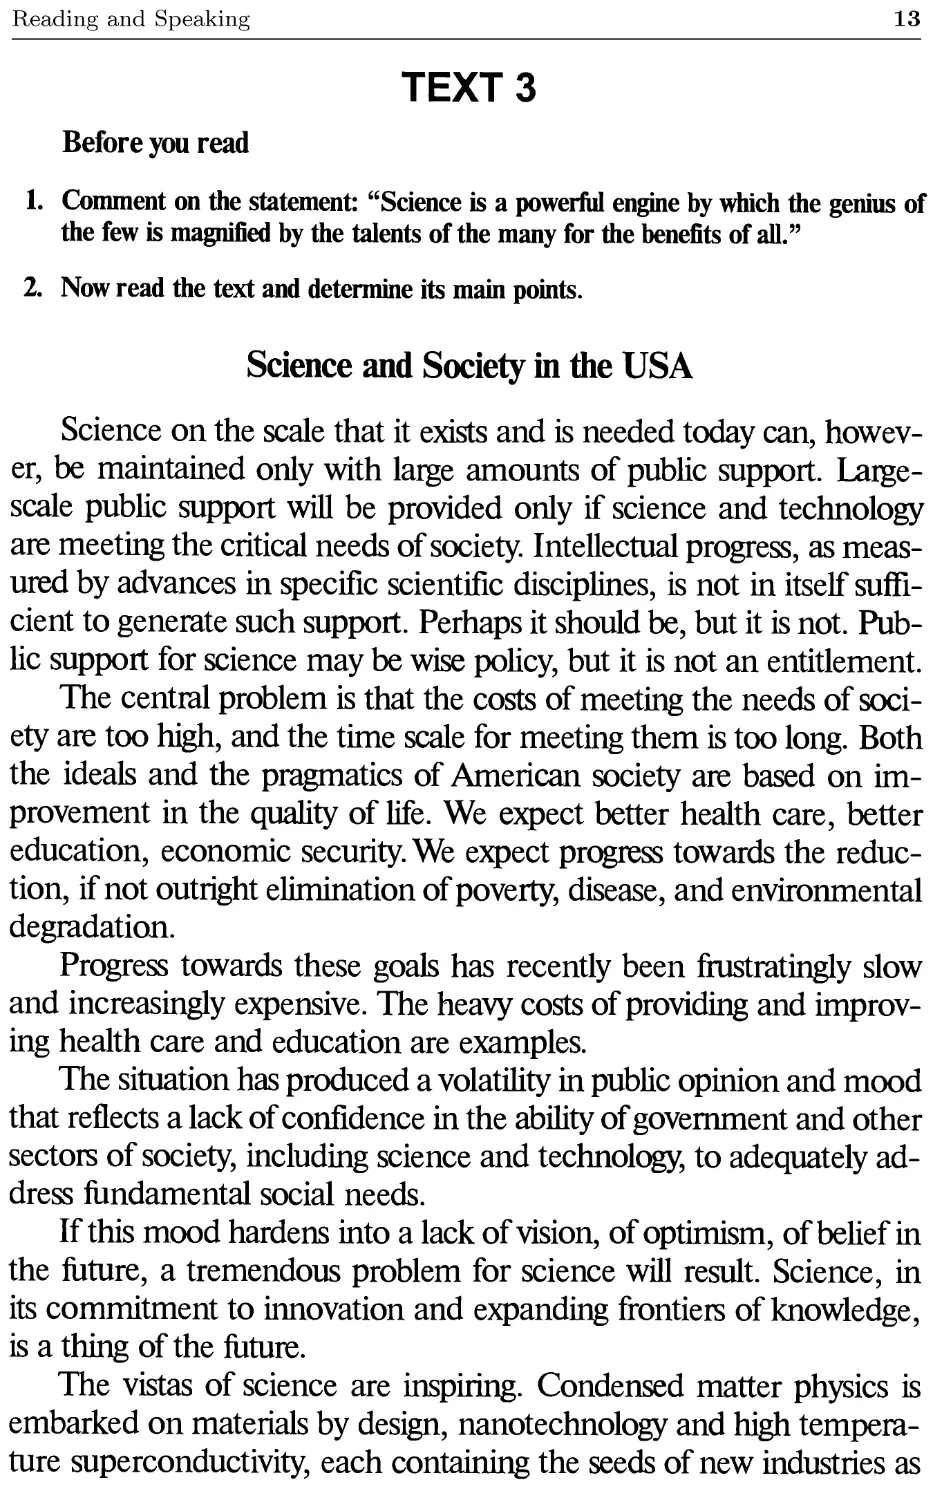 Text 3. Science and Society in the USA